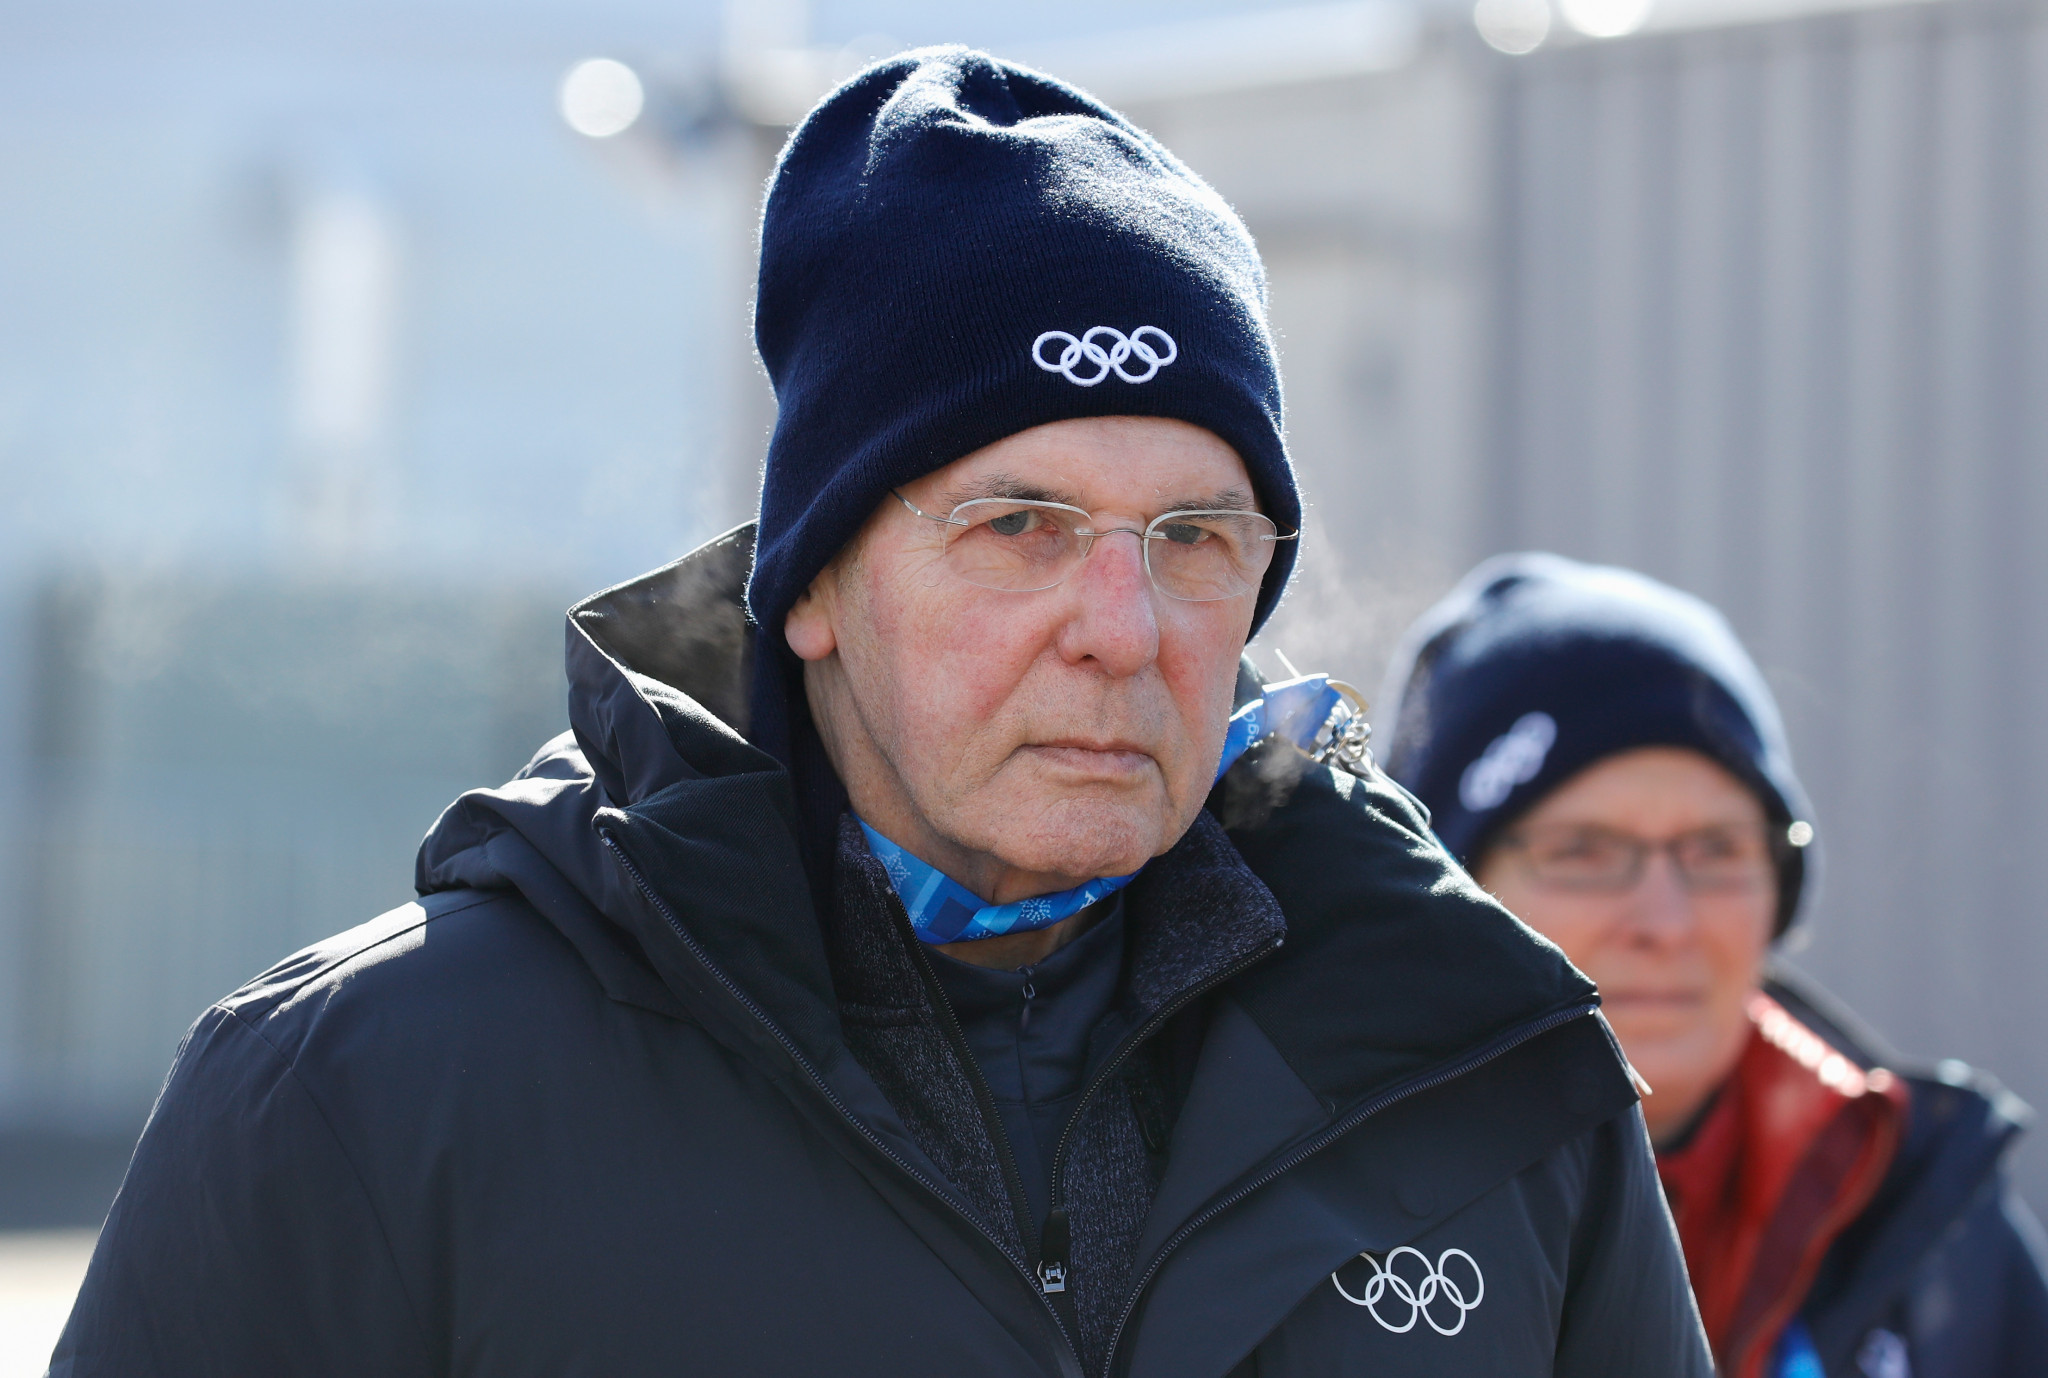 At the 2002 Winter Olympics, Jacques Rogge became the first IOC President to stay in the Olympic Village ©Getty Images